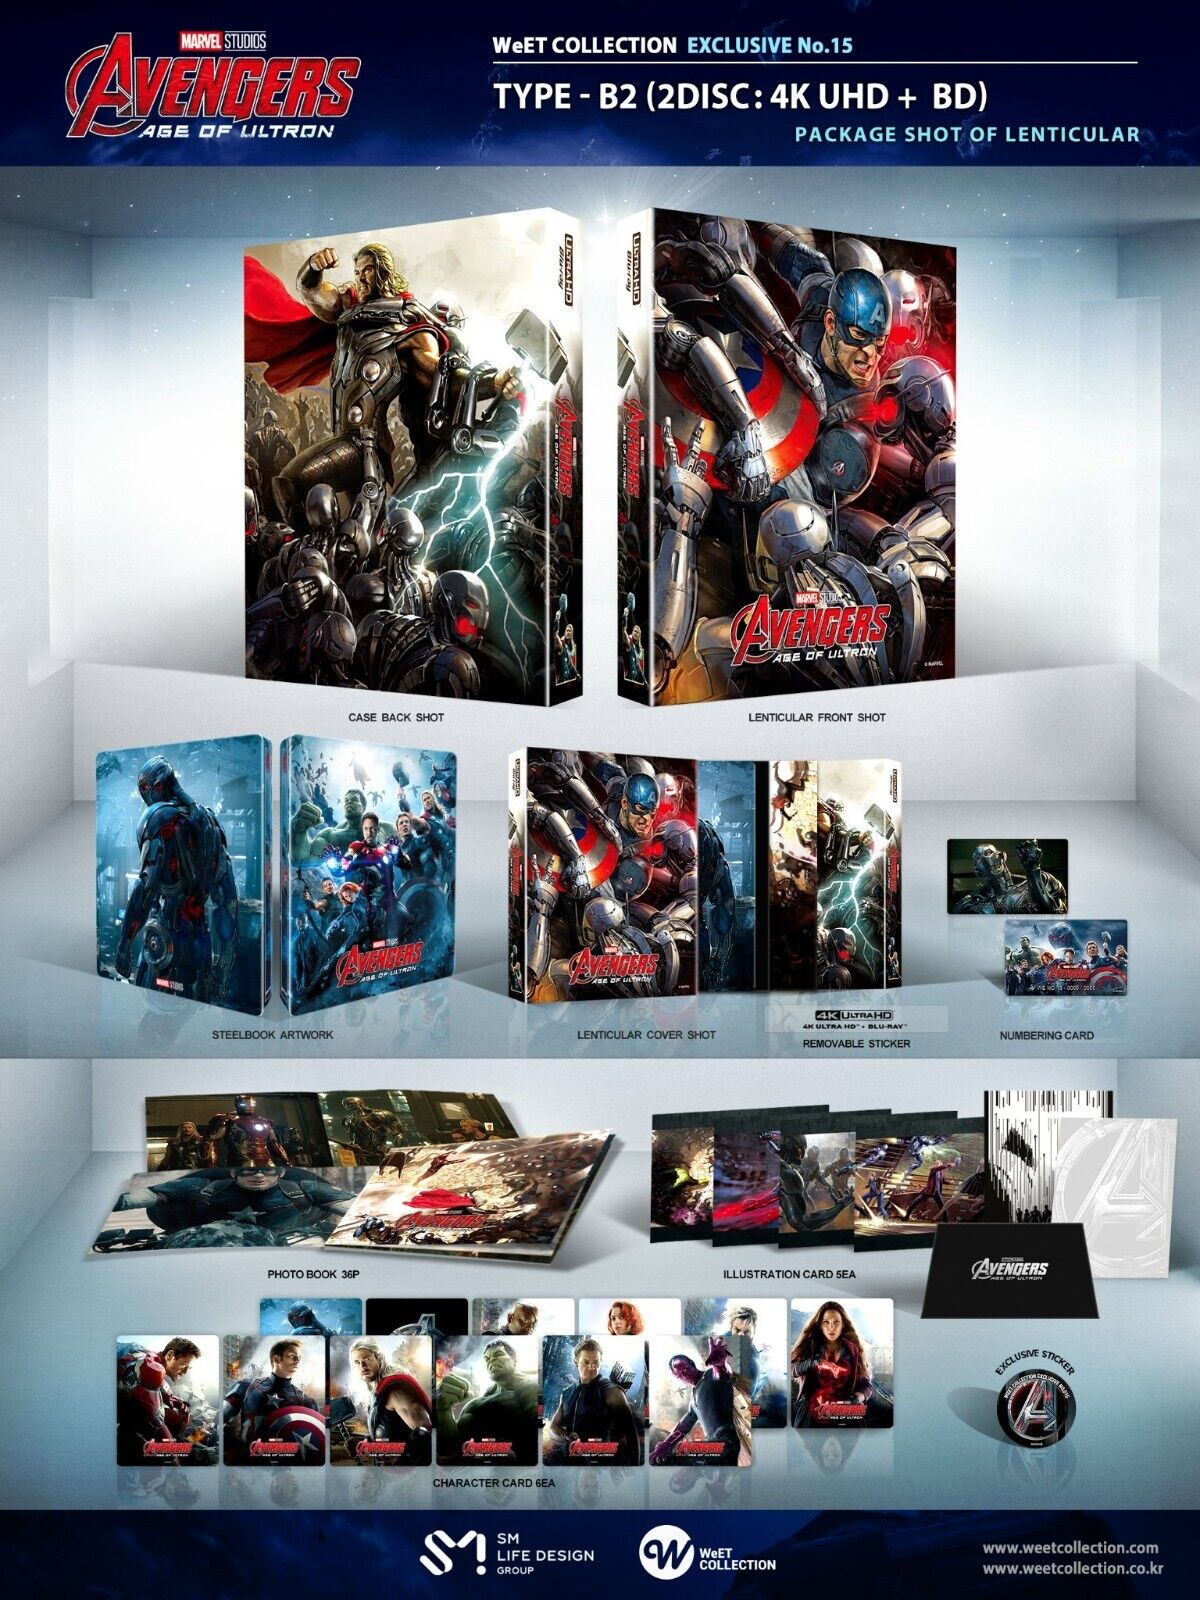 Avengers: Age of Ultron 4K+2D Blu-ray SteelBook WeET Collection Exclusive #15 Lenticular Full Slip B2